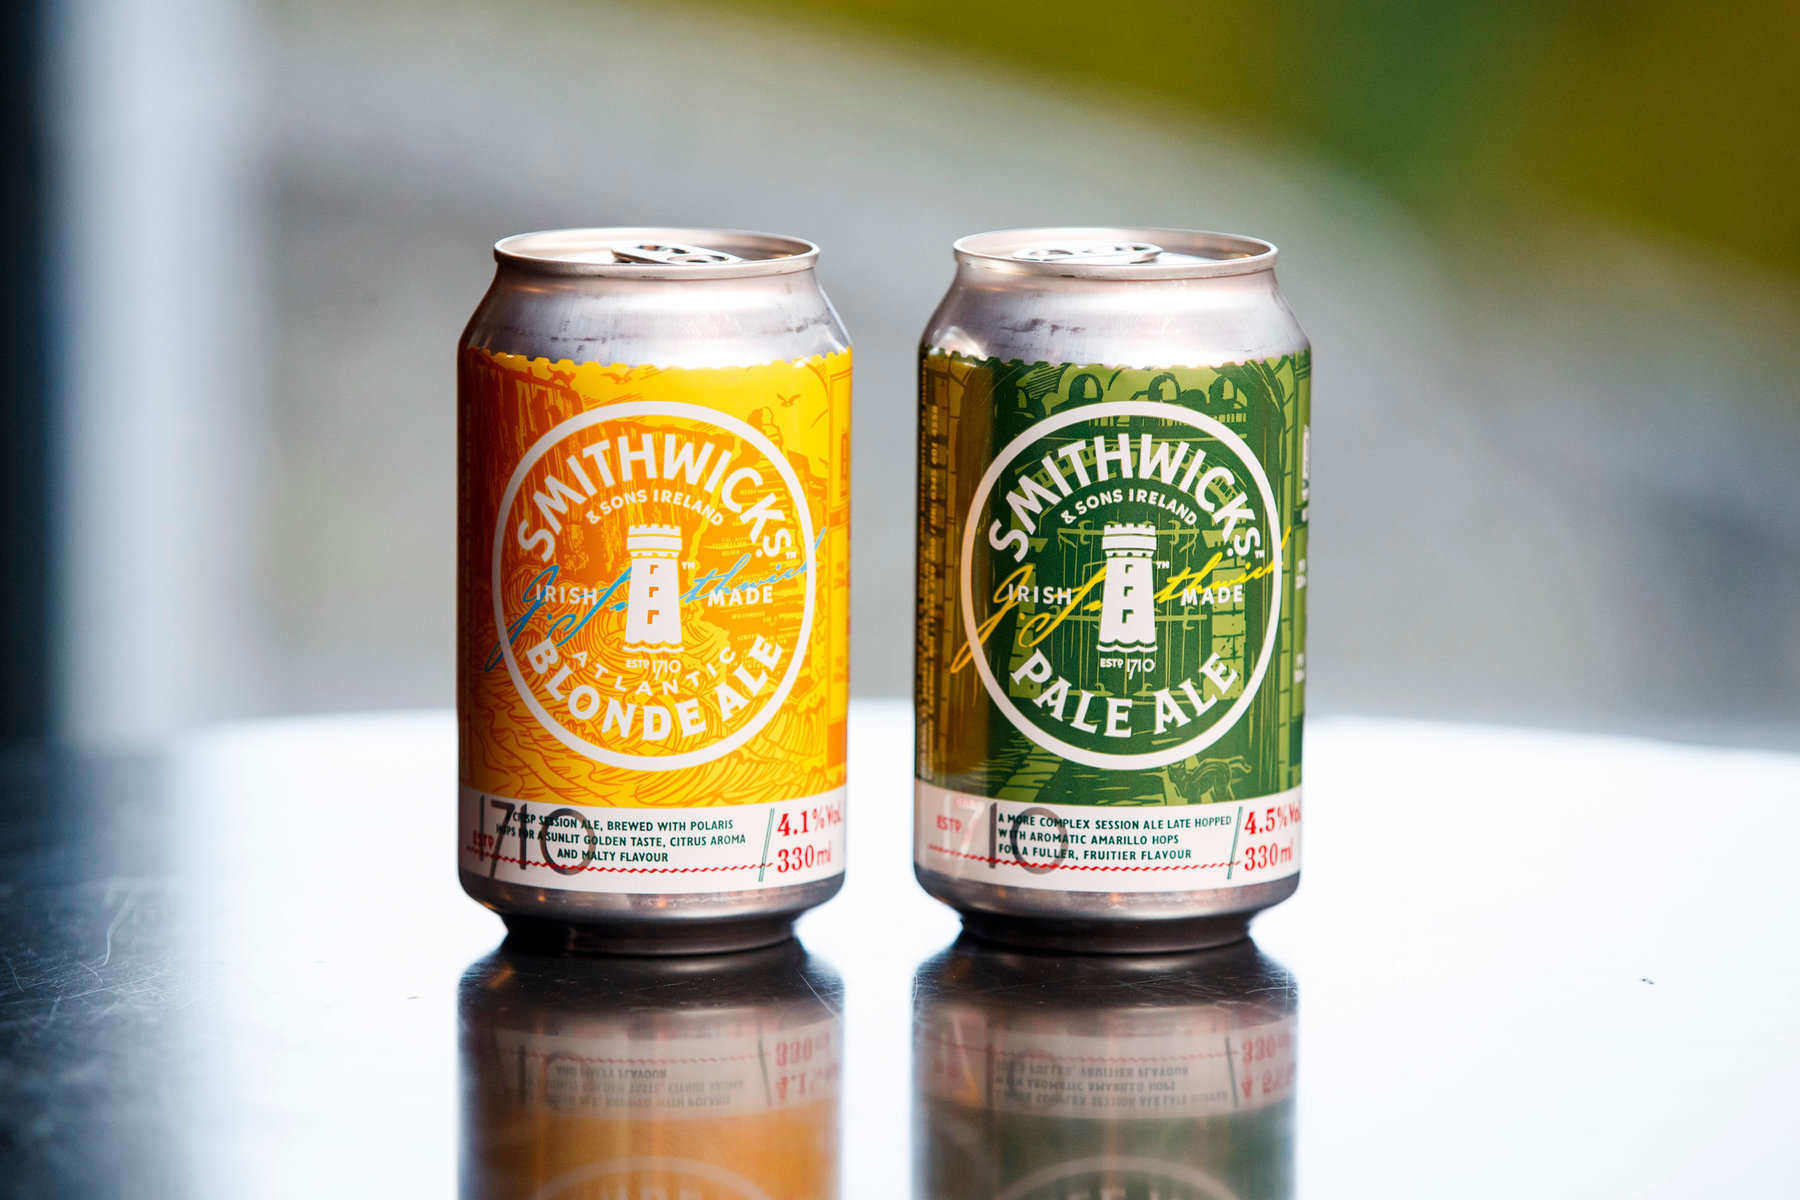 Smithwick's Ale's new packaging features the Dublin-based Irish illustrator Peter Donnelly’s hand-drawn illustrations.